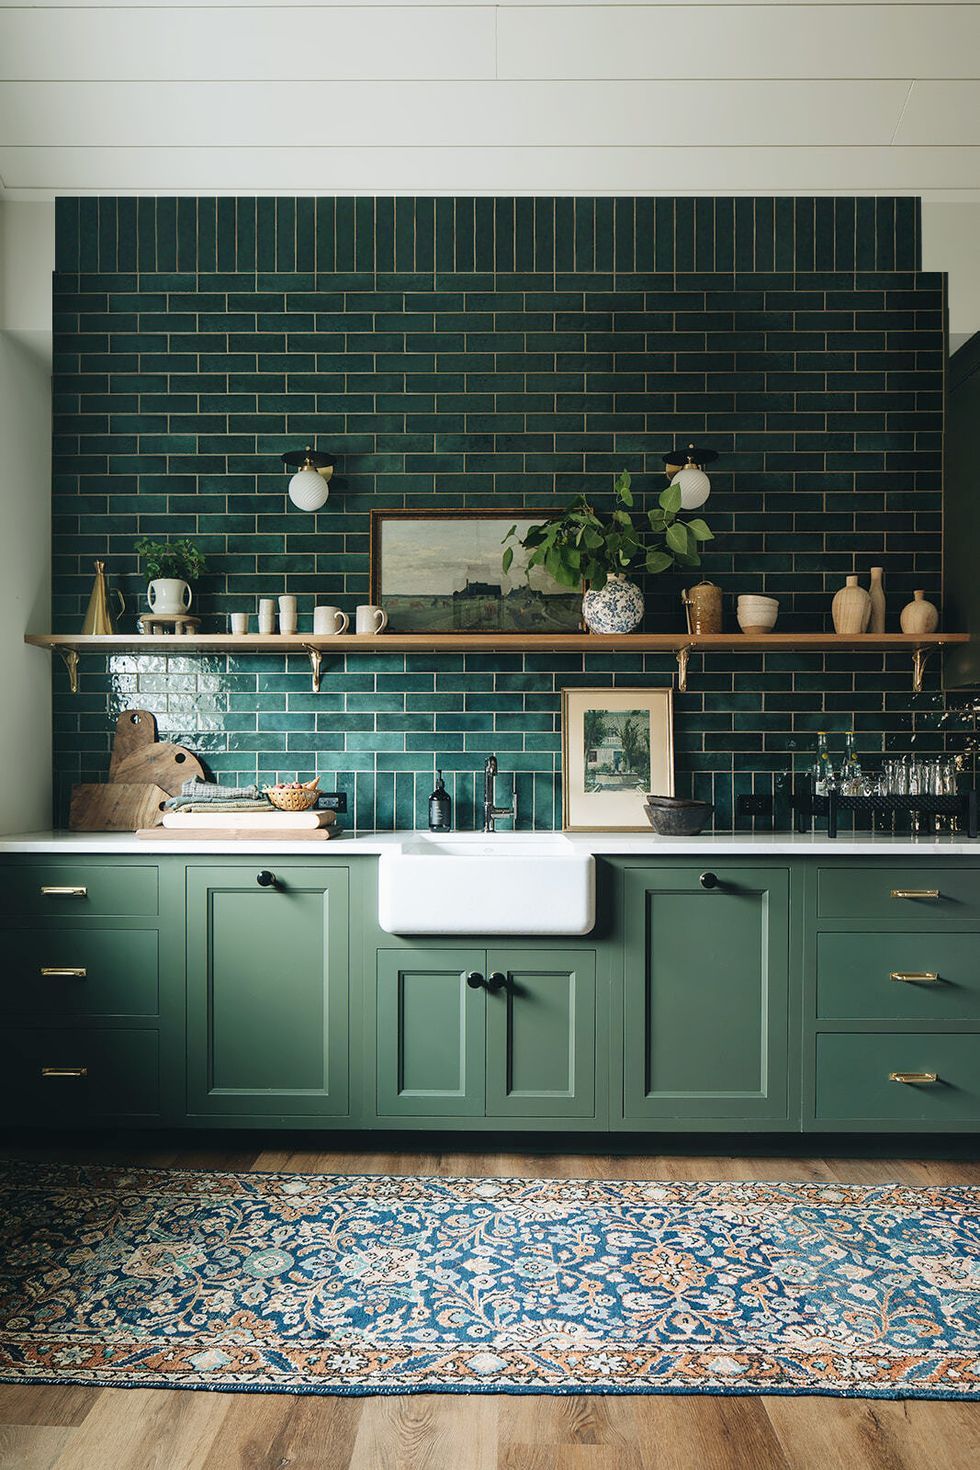 Clever's 5 Best Green Kitchens of 2021